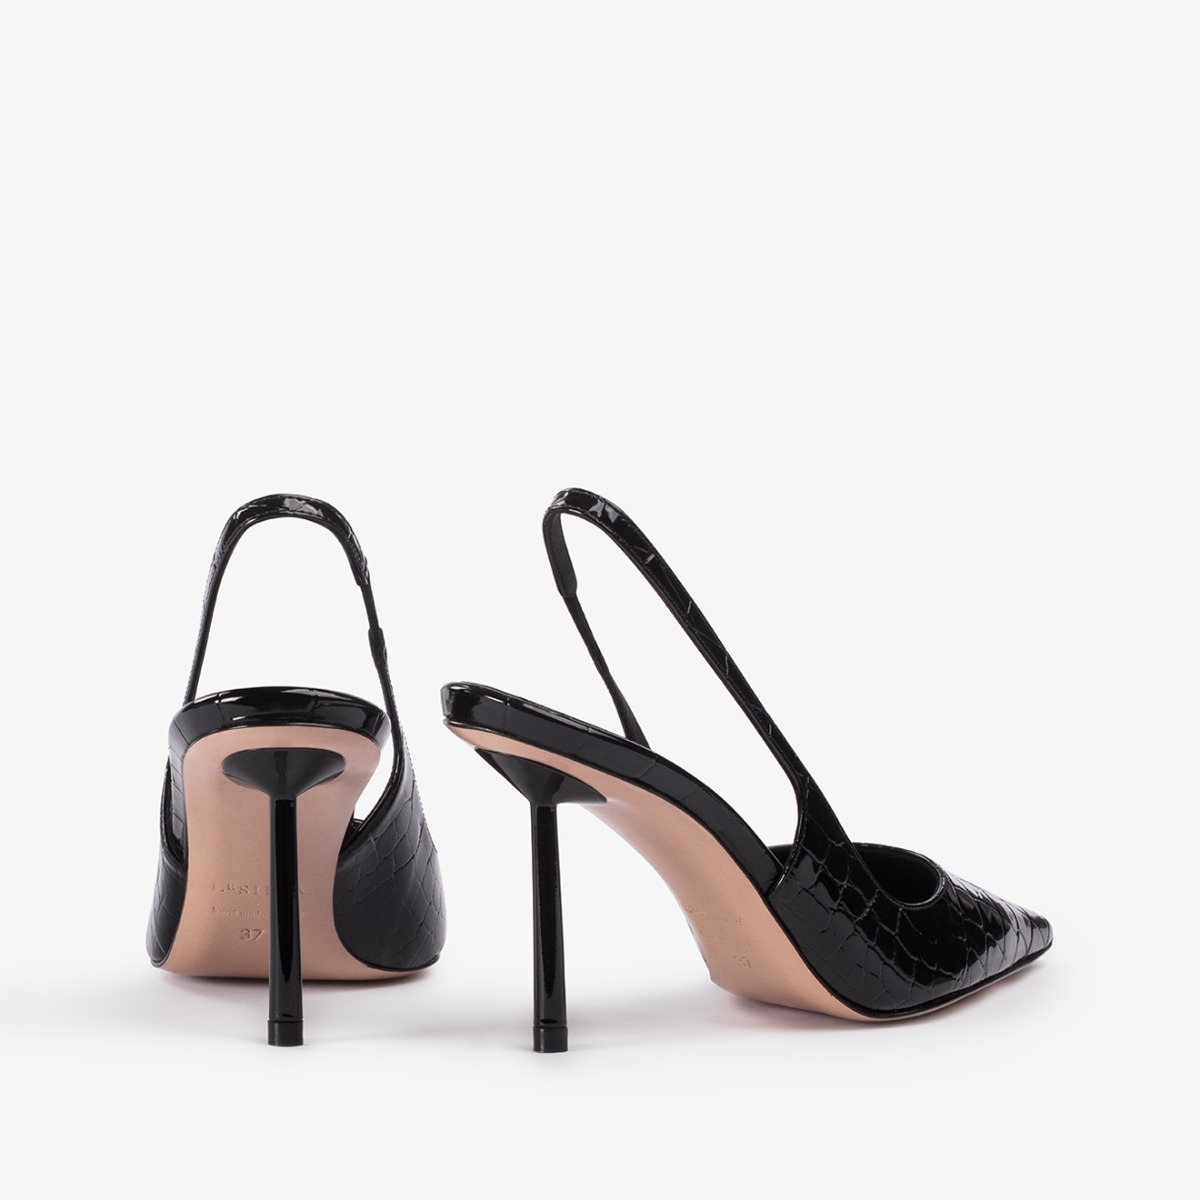 BELLA SLINGBACK 80 mm - Le Silla | Official Online Store